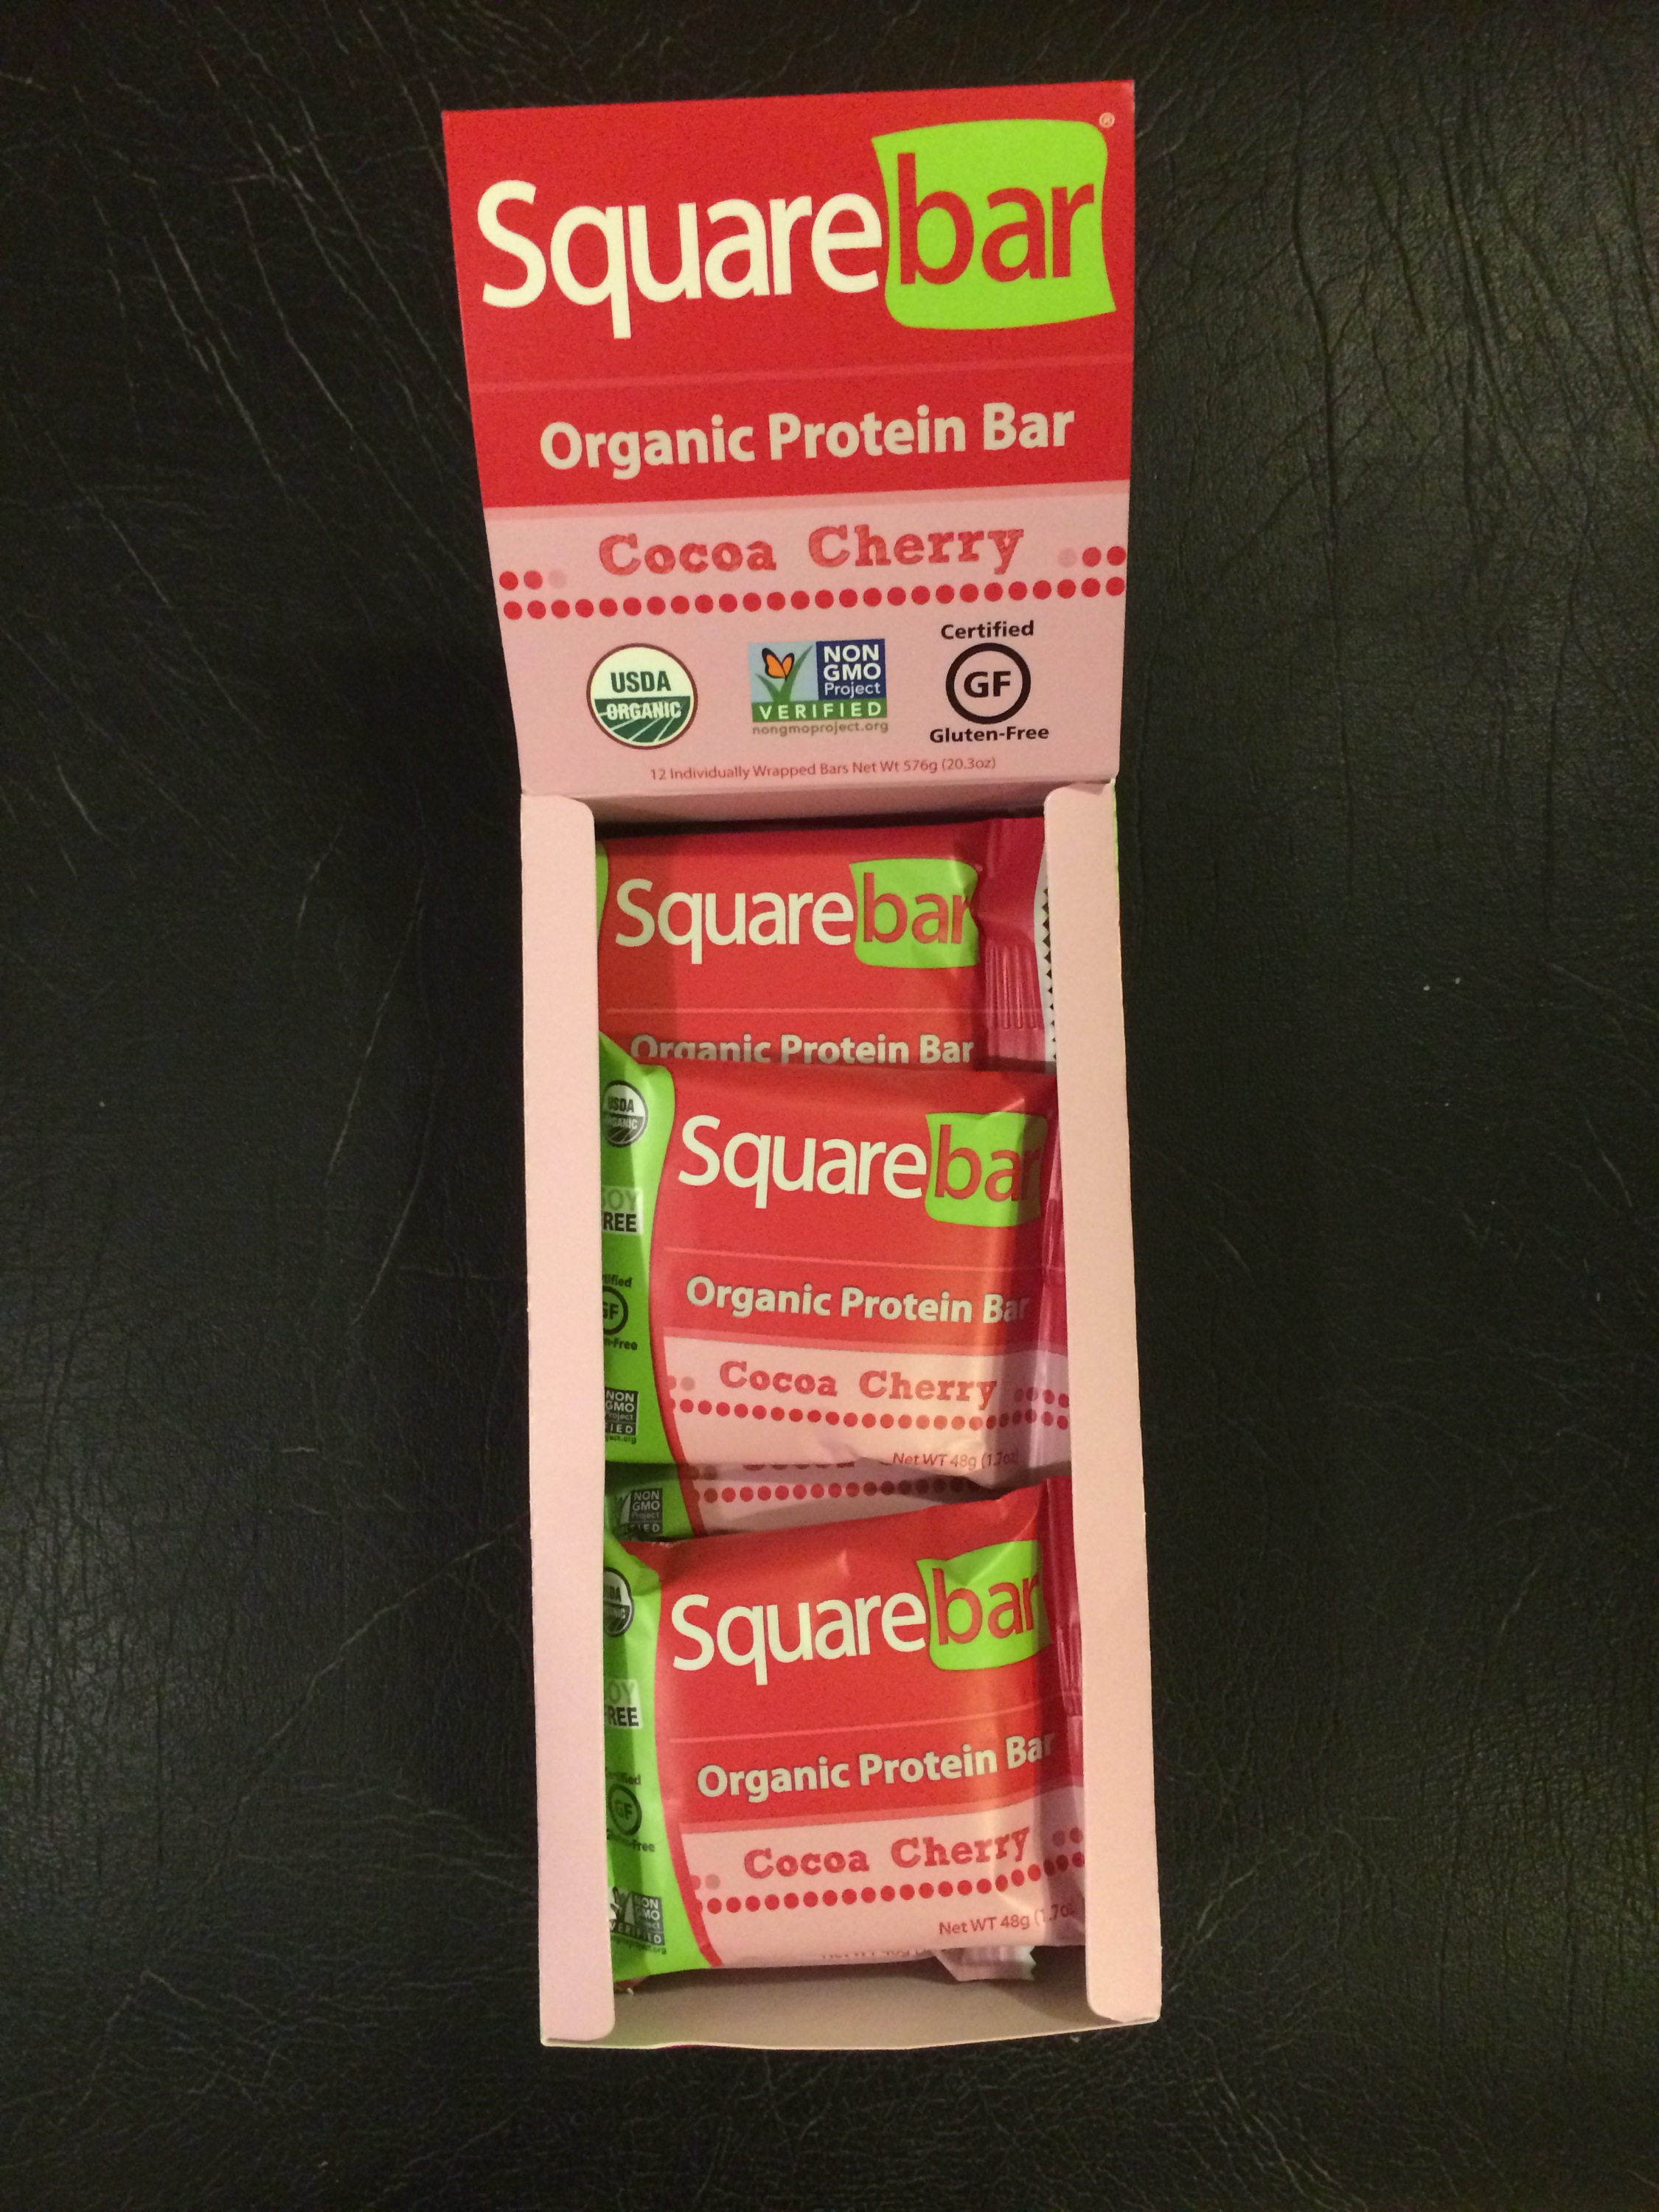 Review - Cocoa Cherry and Cocoa Mint Squarebar Protein Bars - Lazy Girl Vegan